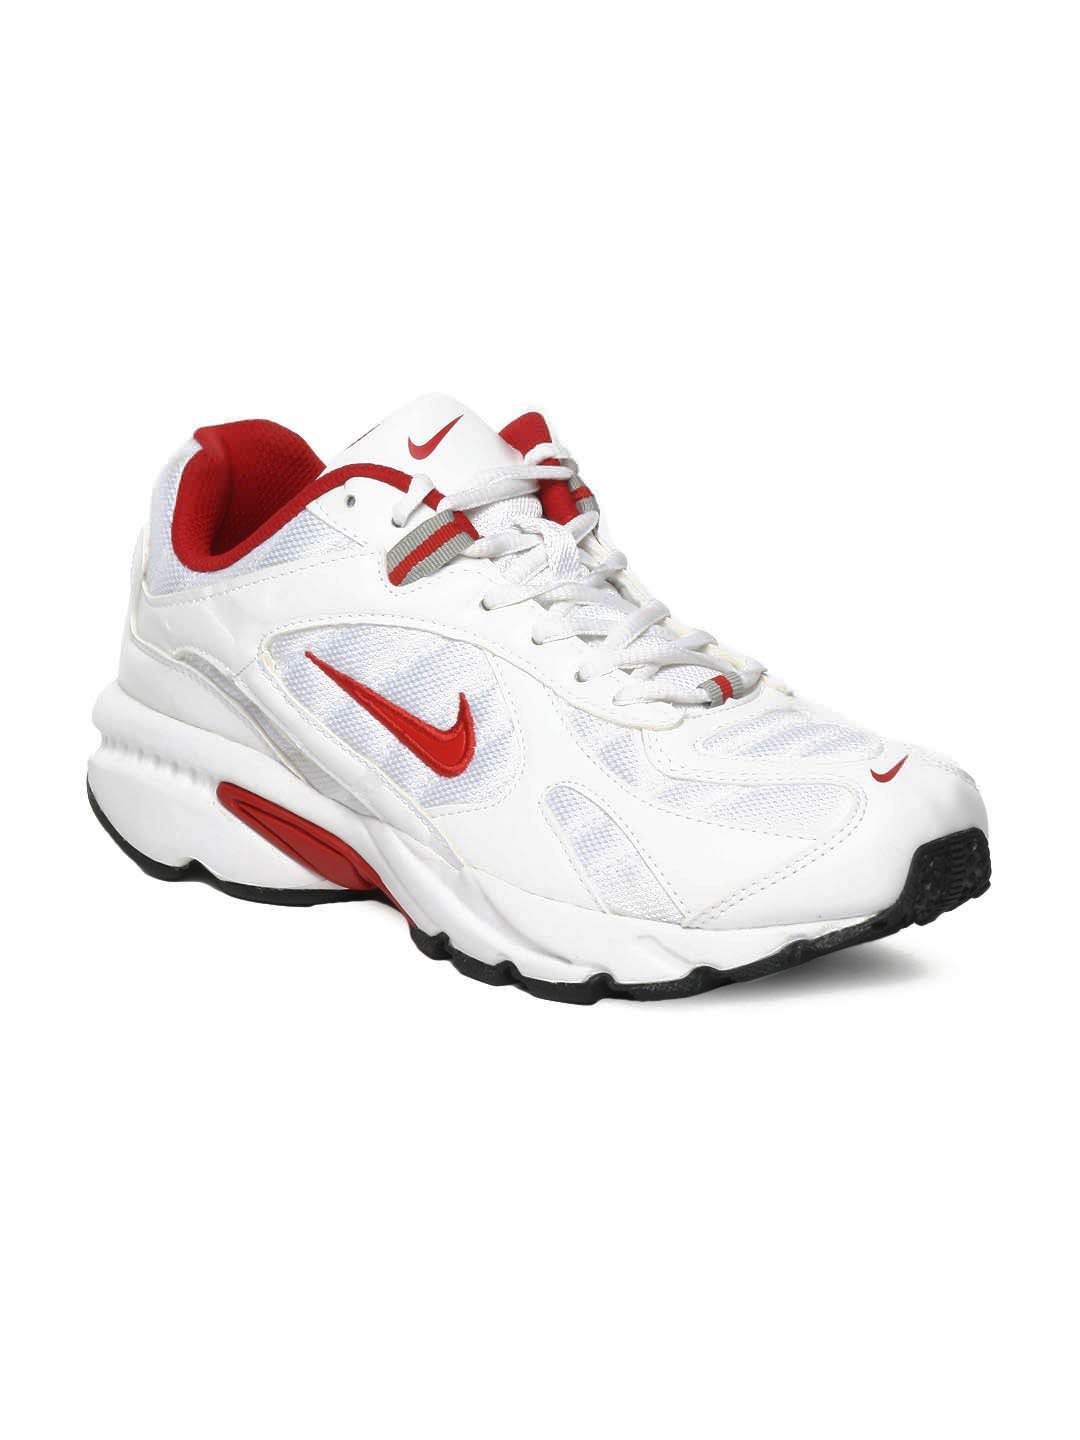 Sports Shoes Online Store Usa